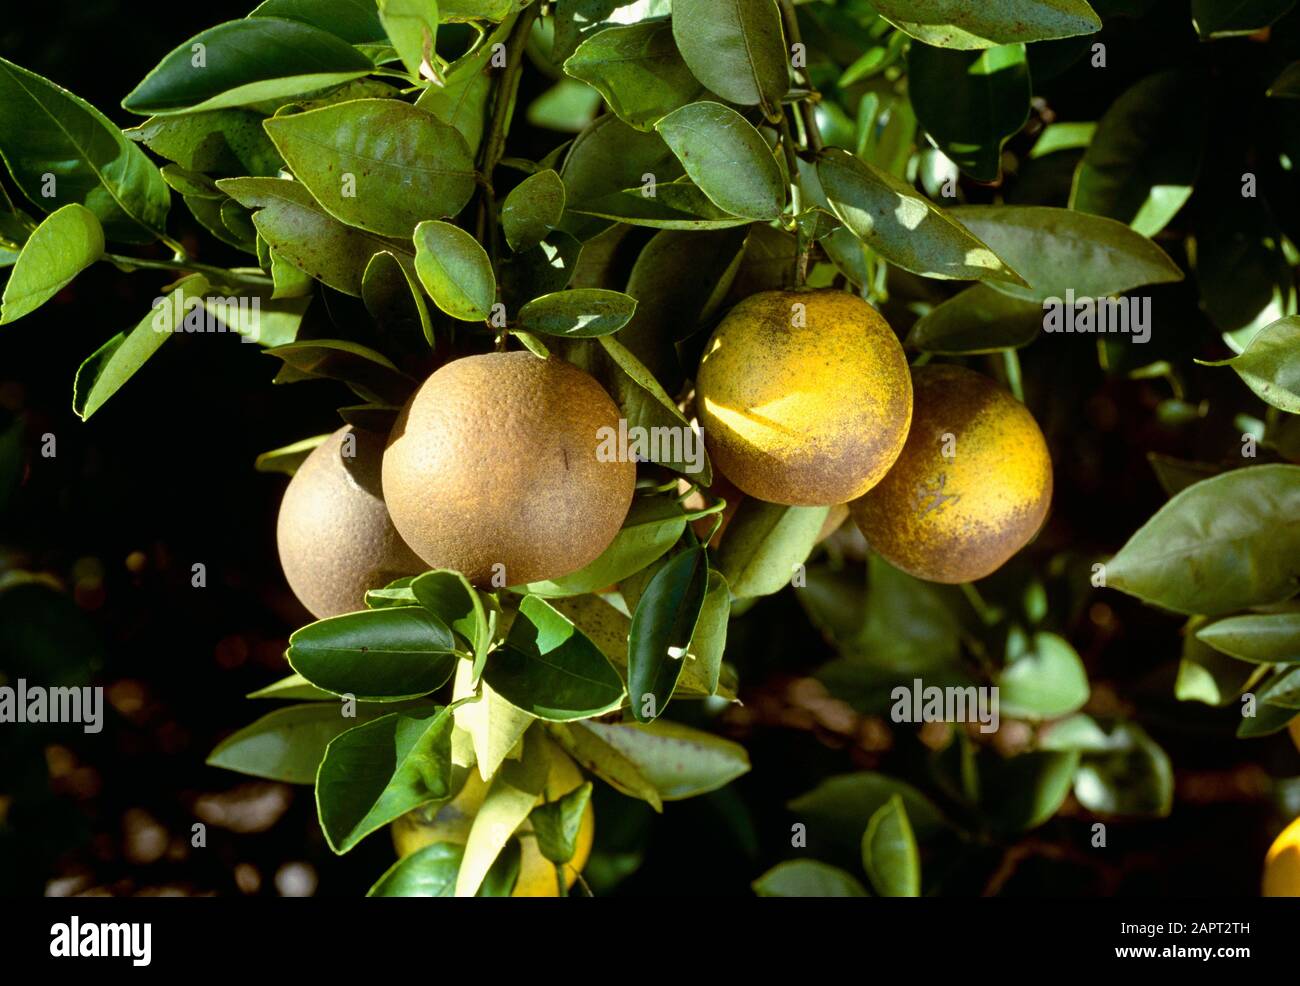 Agriculture - Crop damage, Russeting damage on oranges caused by Citrus rust mite / Florida, USA. Stock Photo